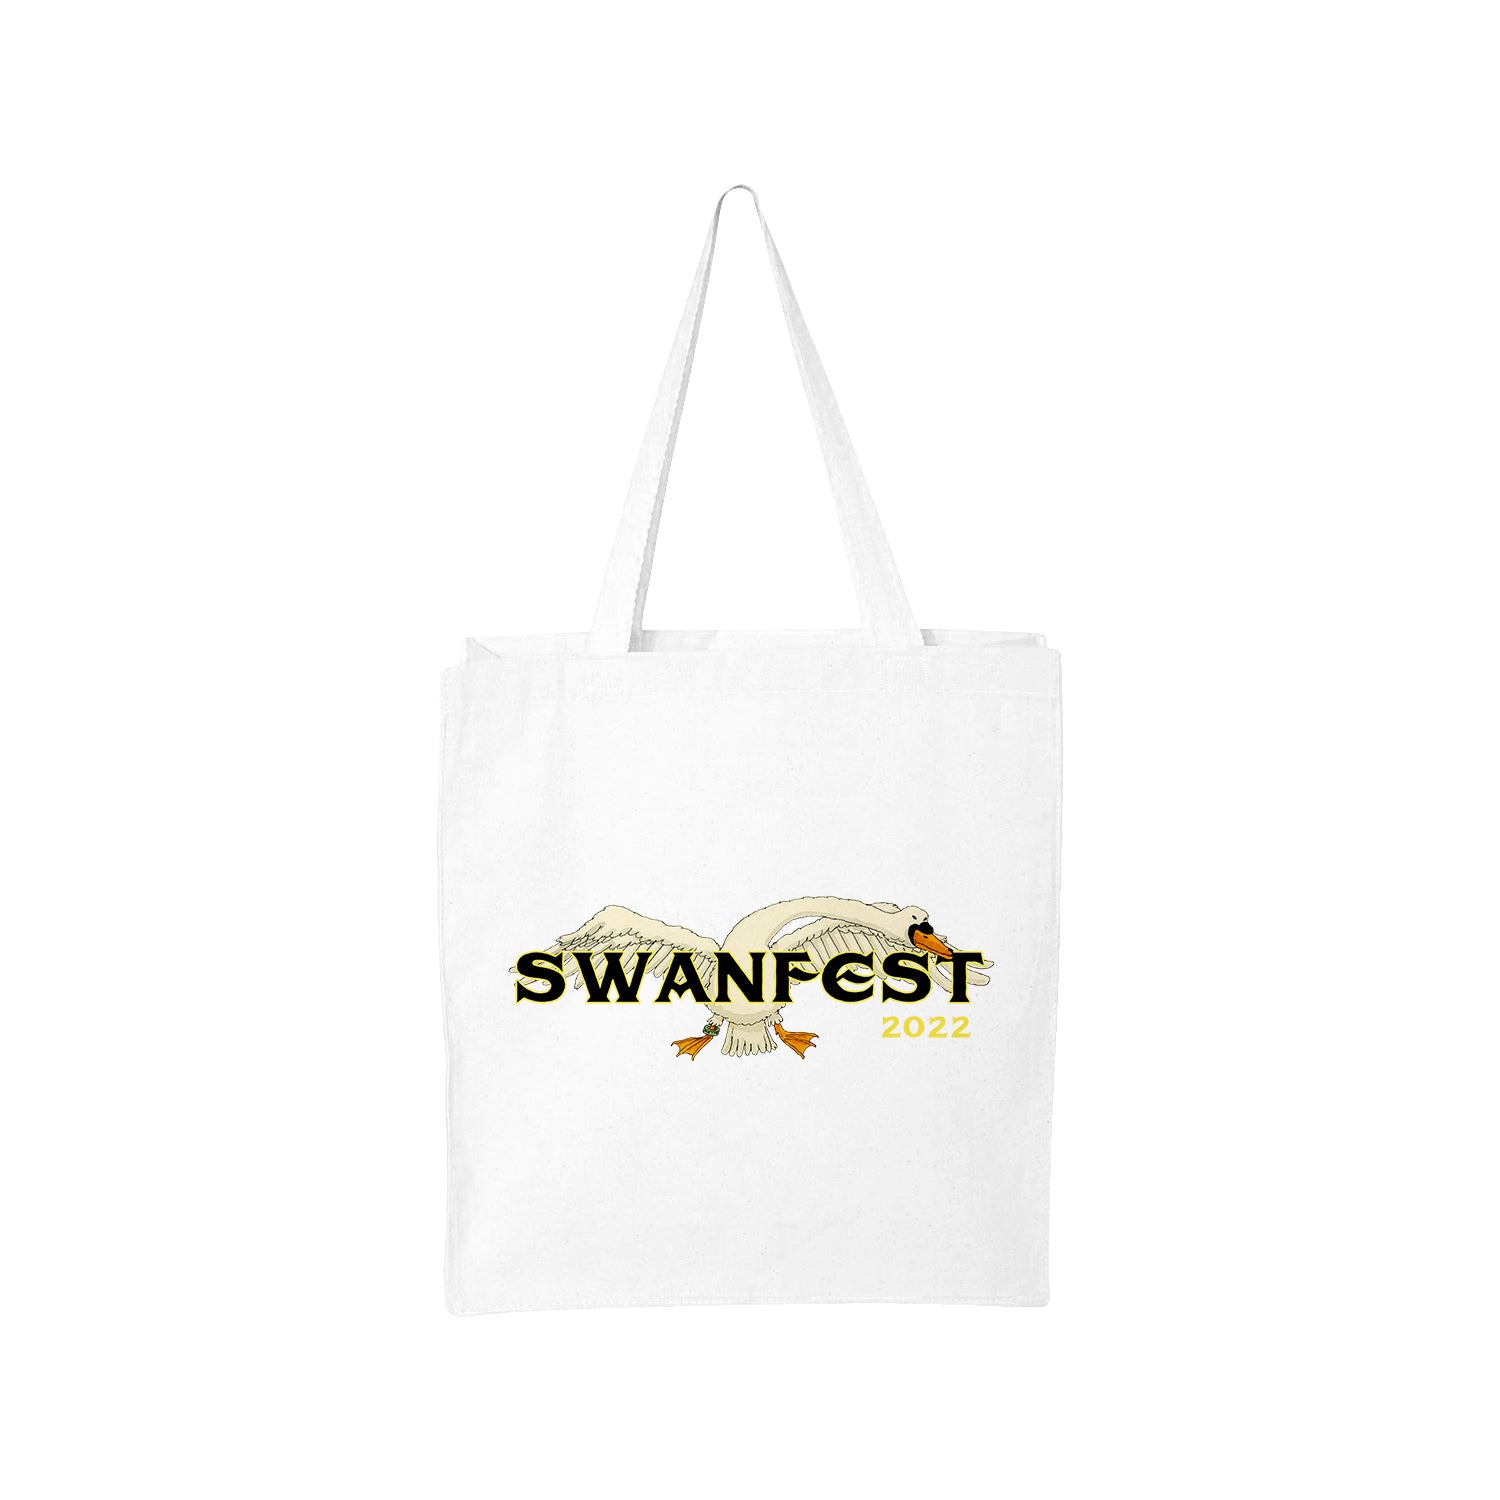 image of a white tote bag on a white background. the tote bag has the handles extended up and a large print on the front of a swan with the wings extended and says swanfest over the swan in black and 2022 in yellow below on the right,